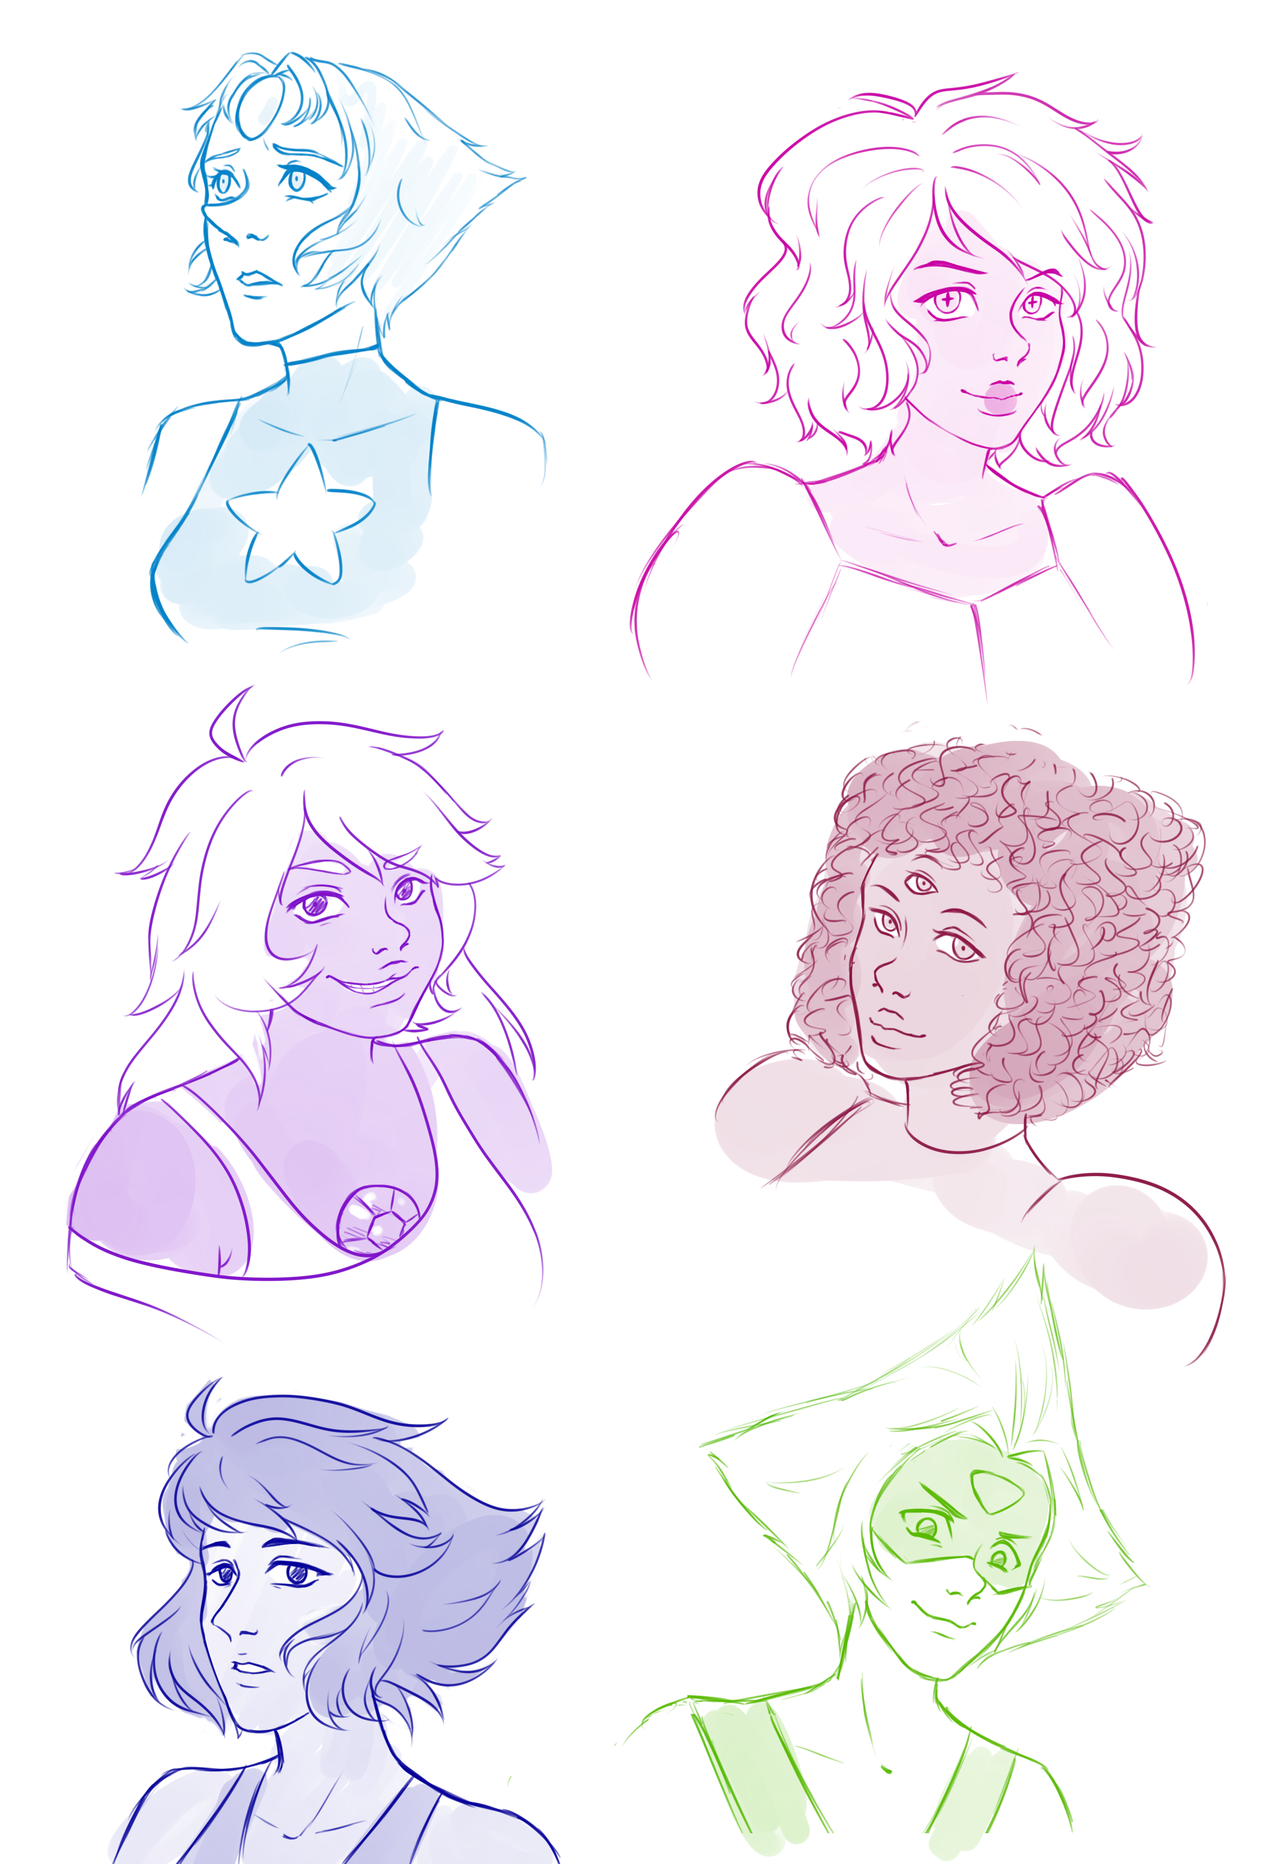 I tried to draw some Steven Universe head sketches and I found it was great to draw characters who are of different morphology and ethnicity °u°